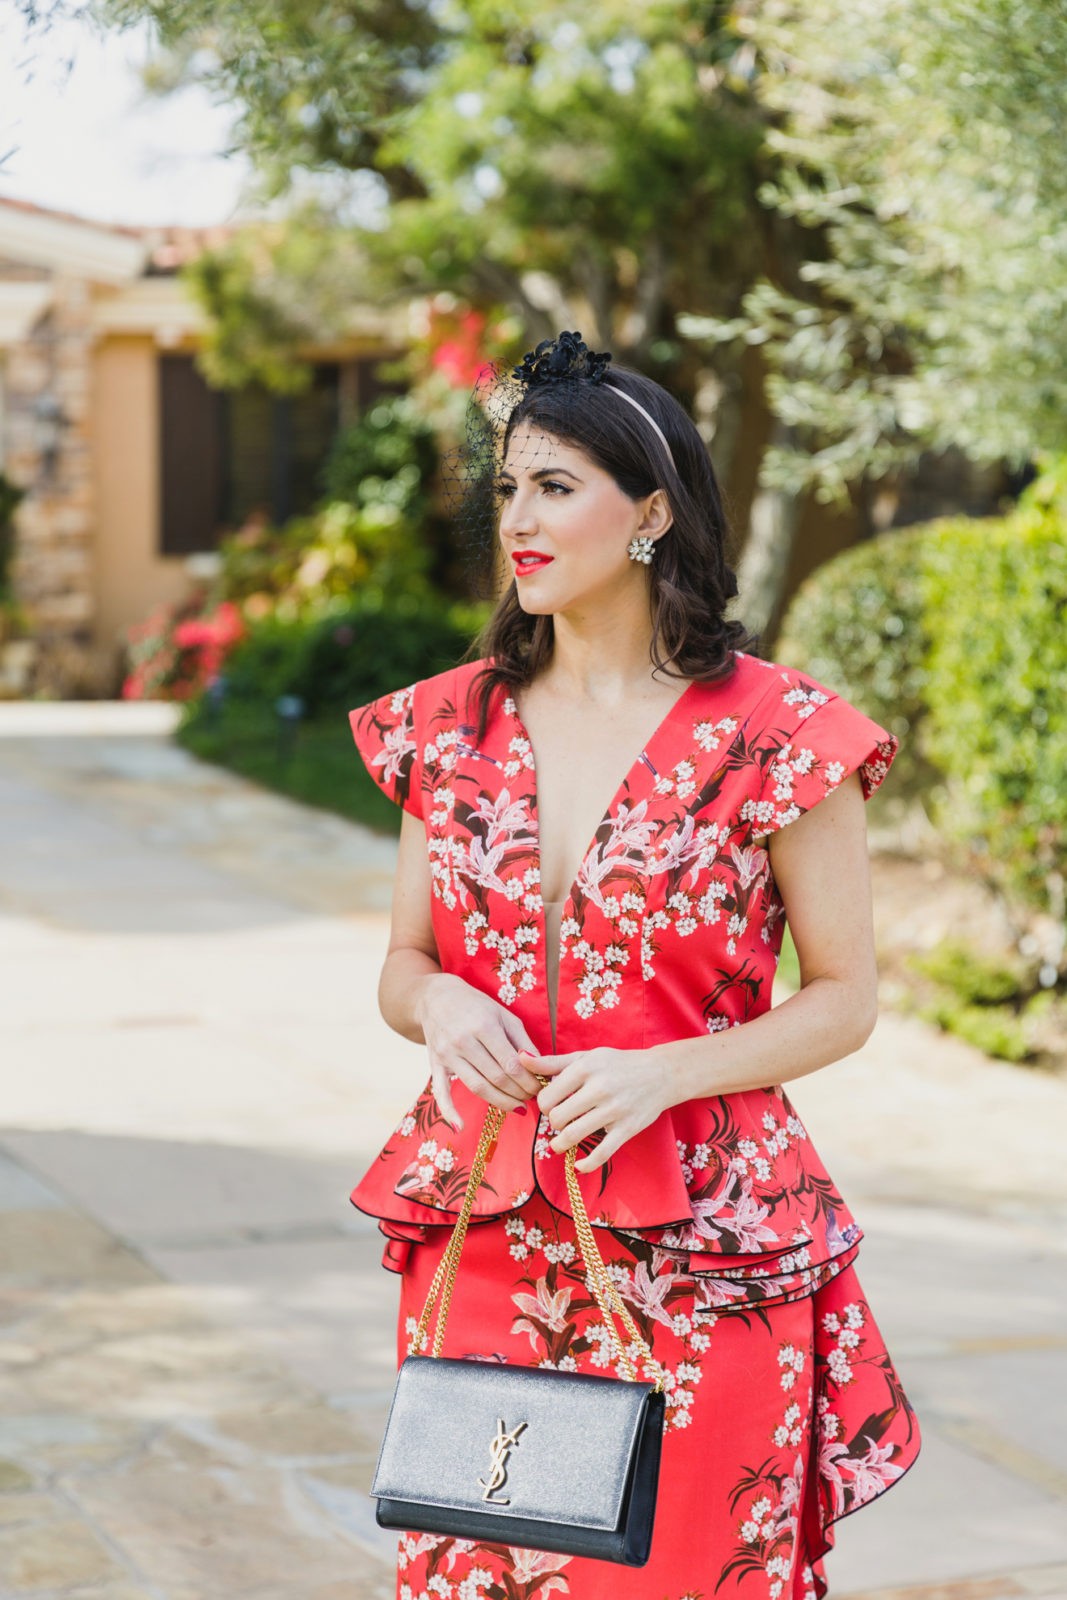 Floral Peplum Dress featured by top US fashion blogger Laura Lily; Image of a woman wearing a Joanna Ortiz Floral Peplum Dress.